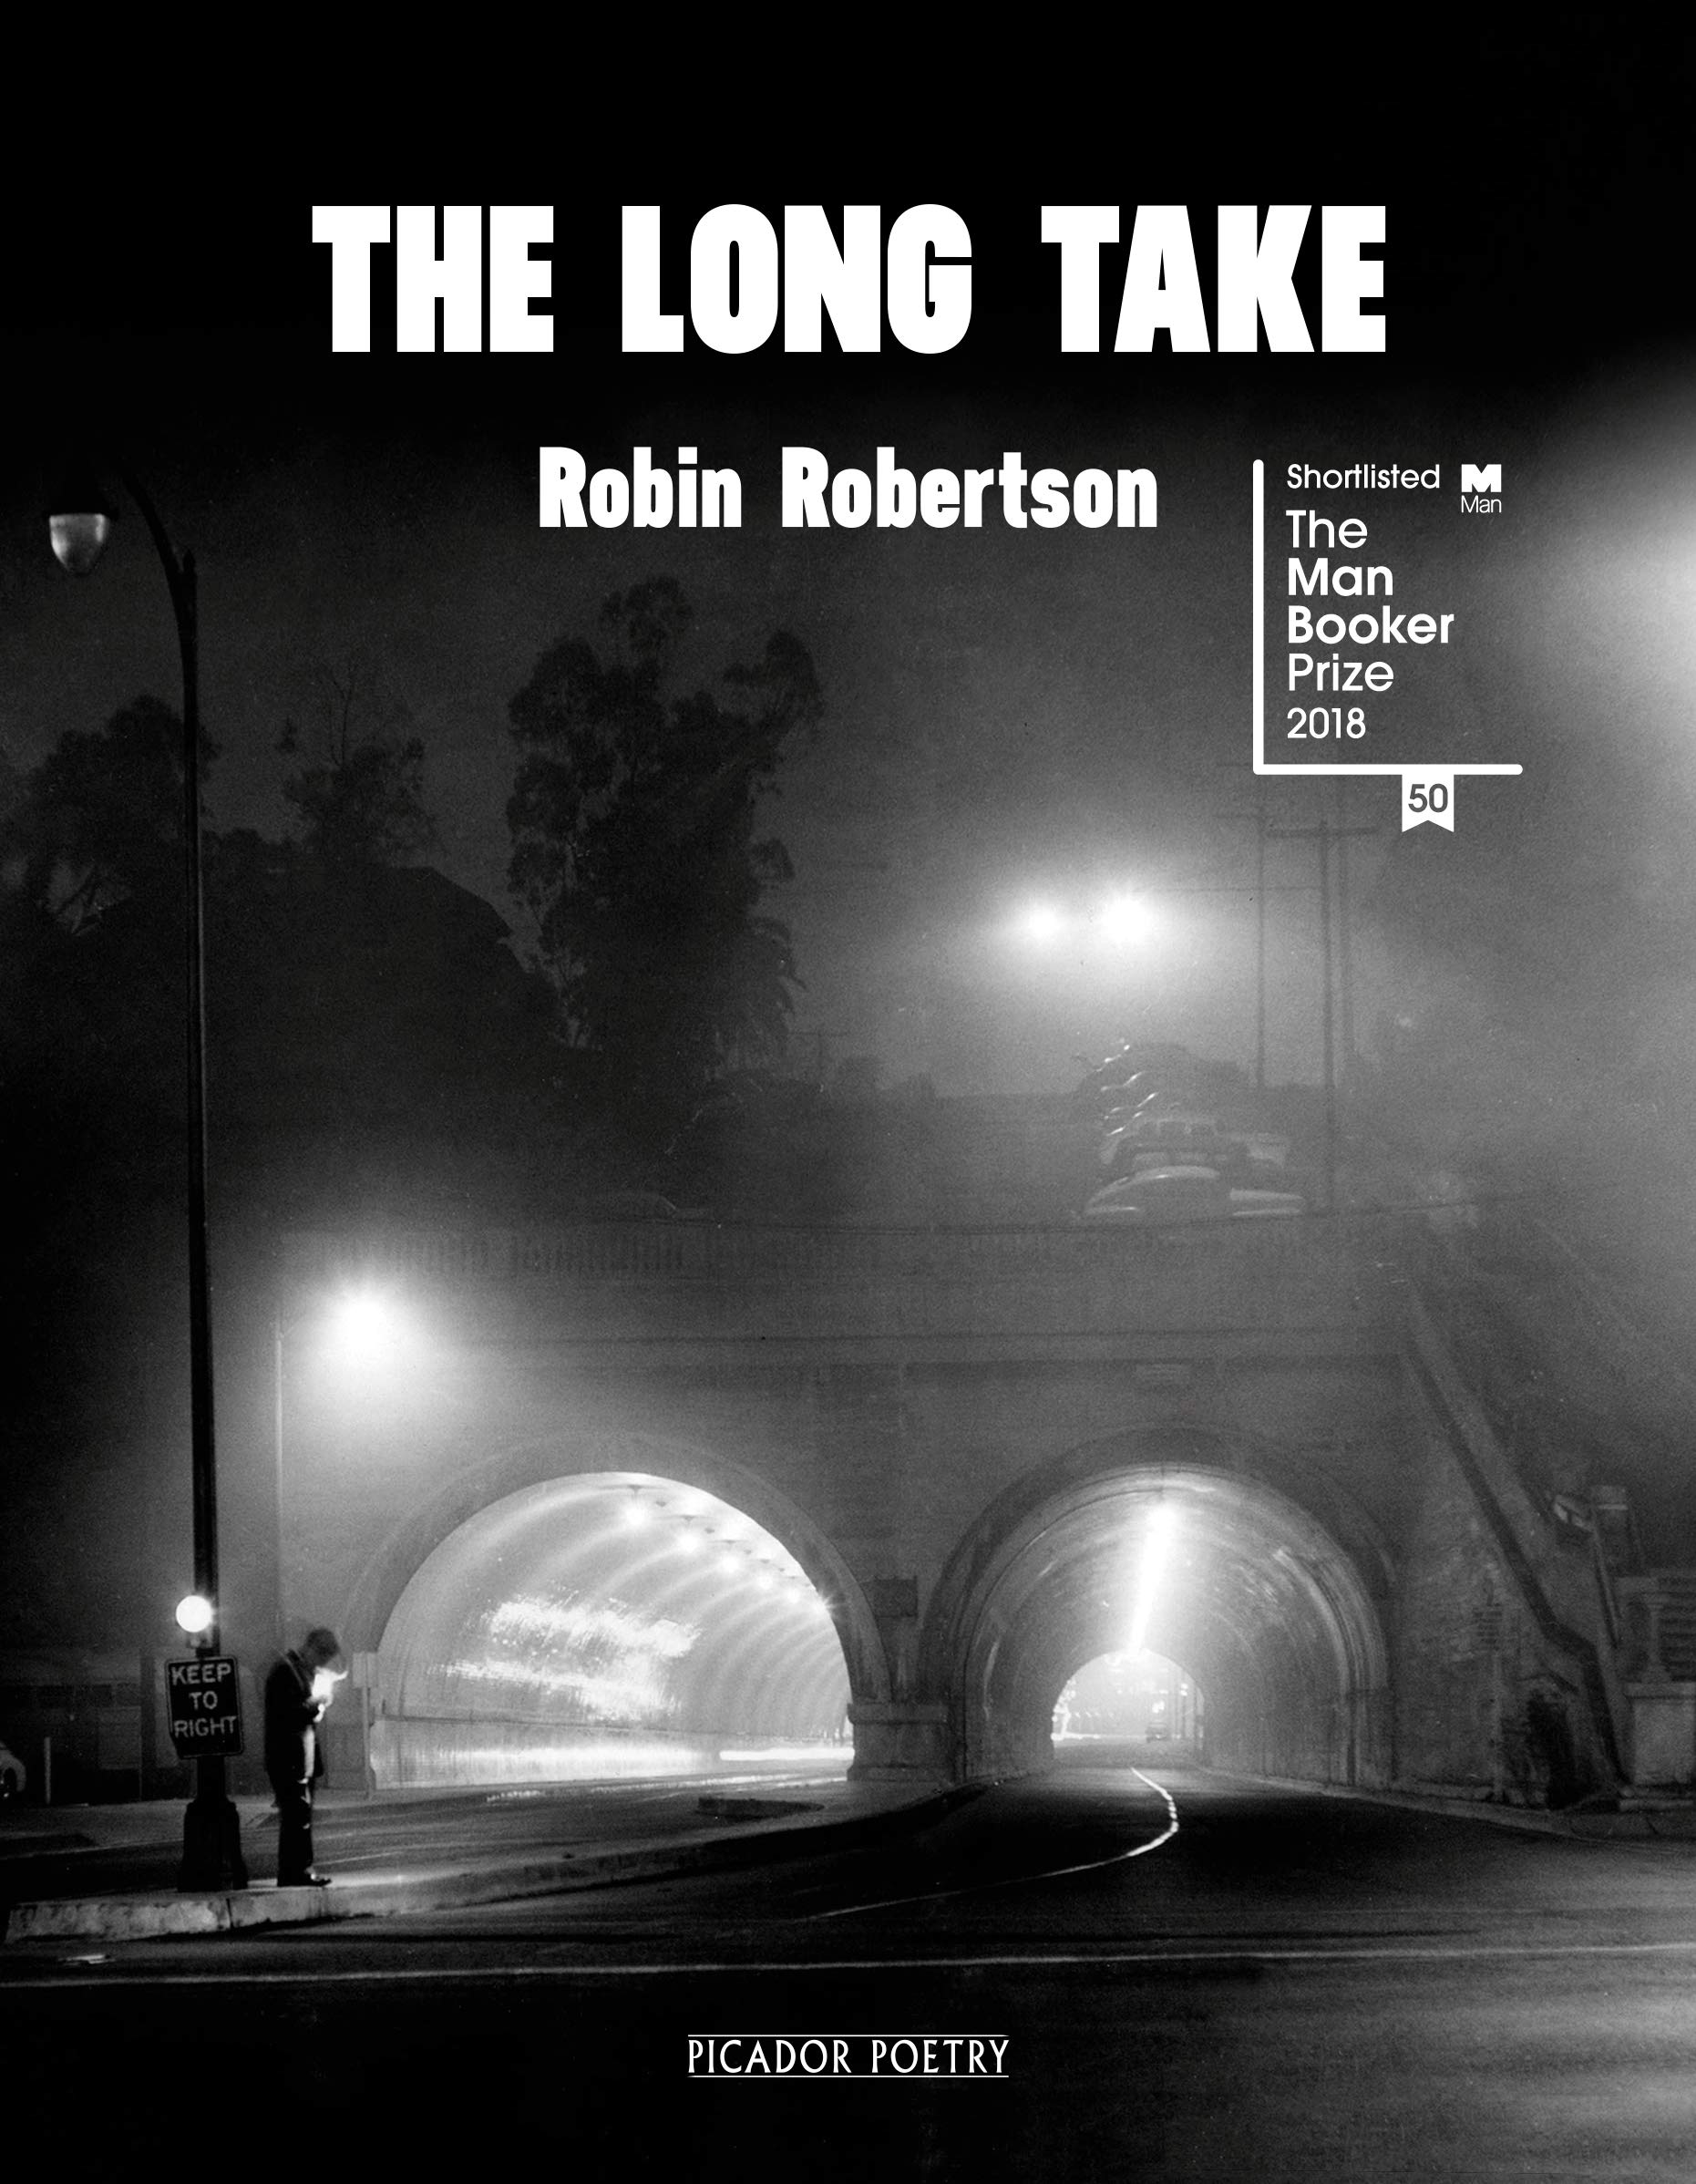 Image for "The Long Take"